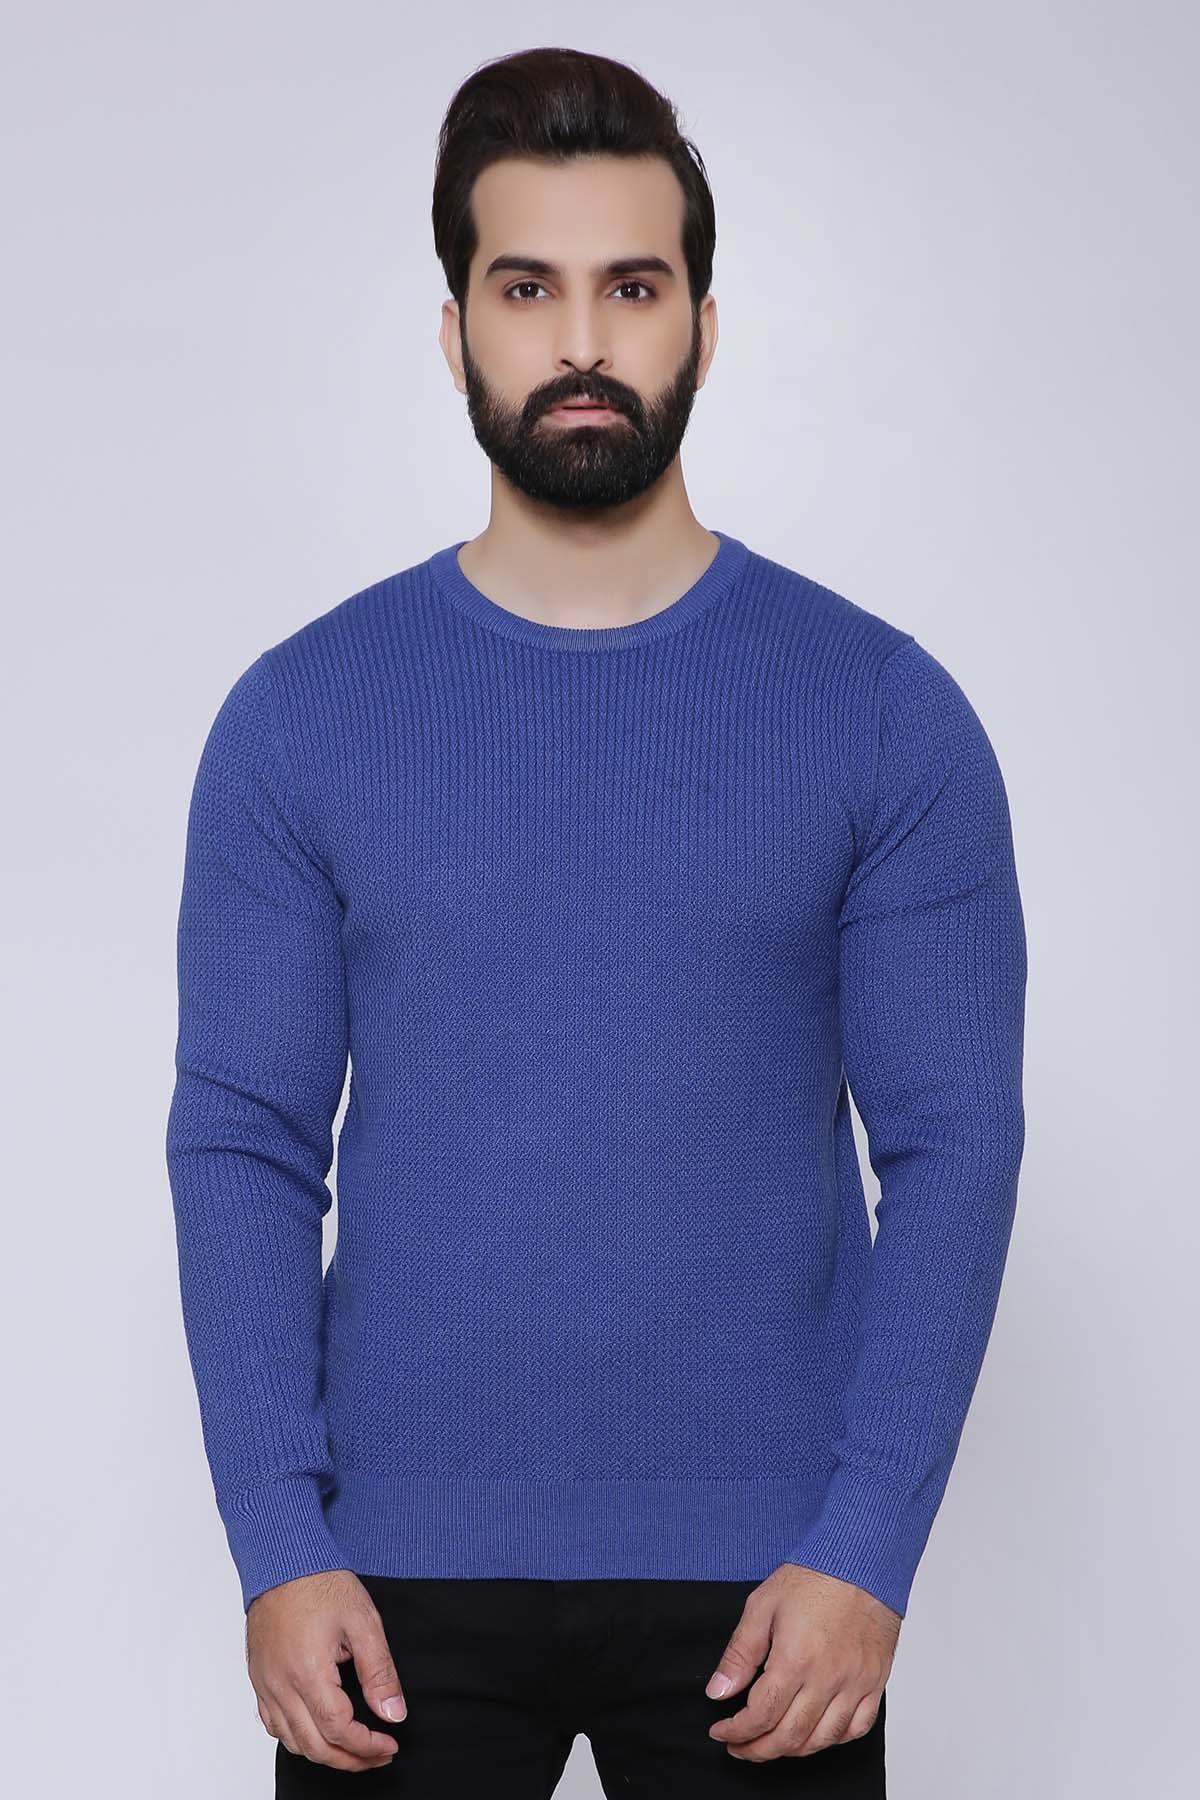 SWEATER ROUND NECK FULL SLEEVE BLUE at Charcoal Clothing